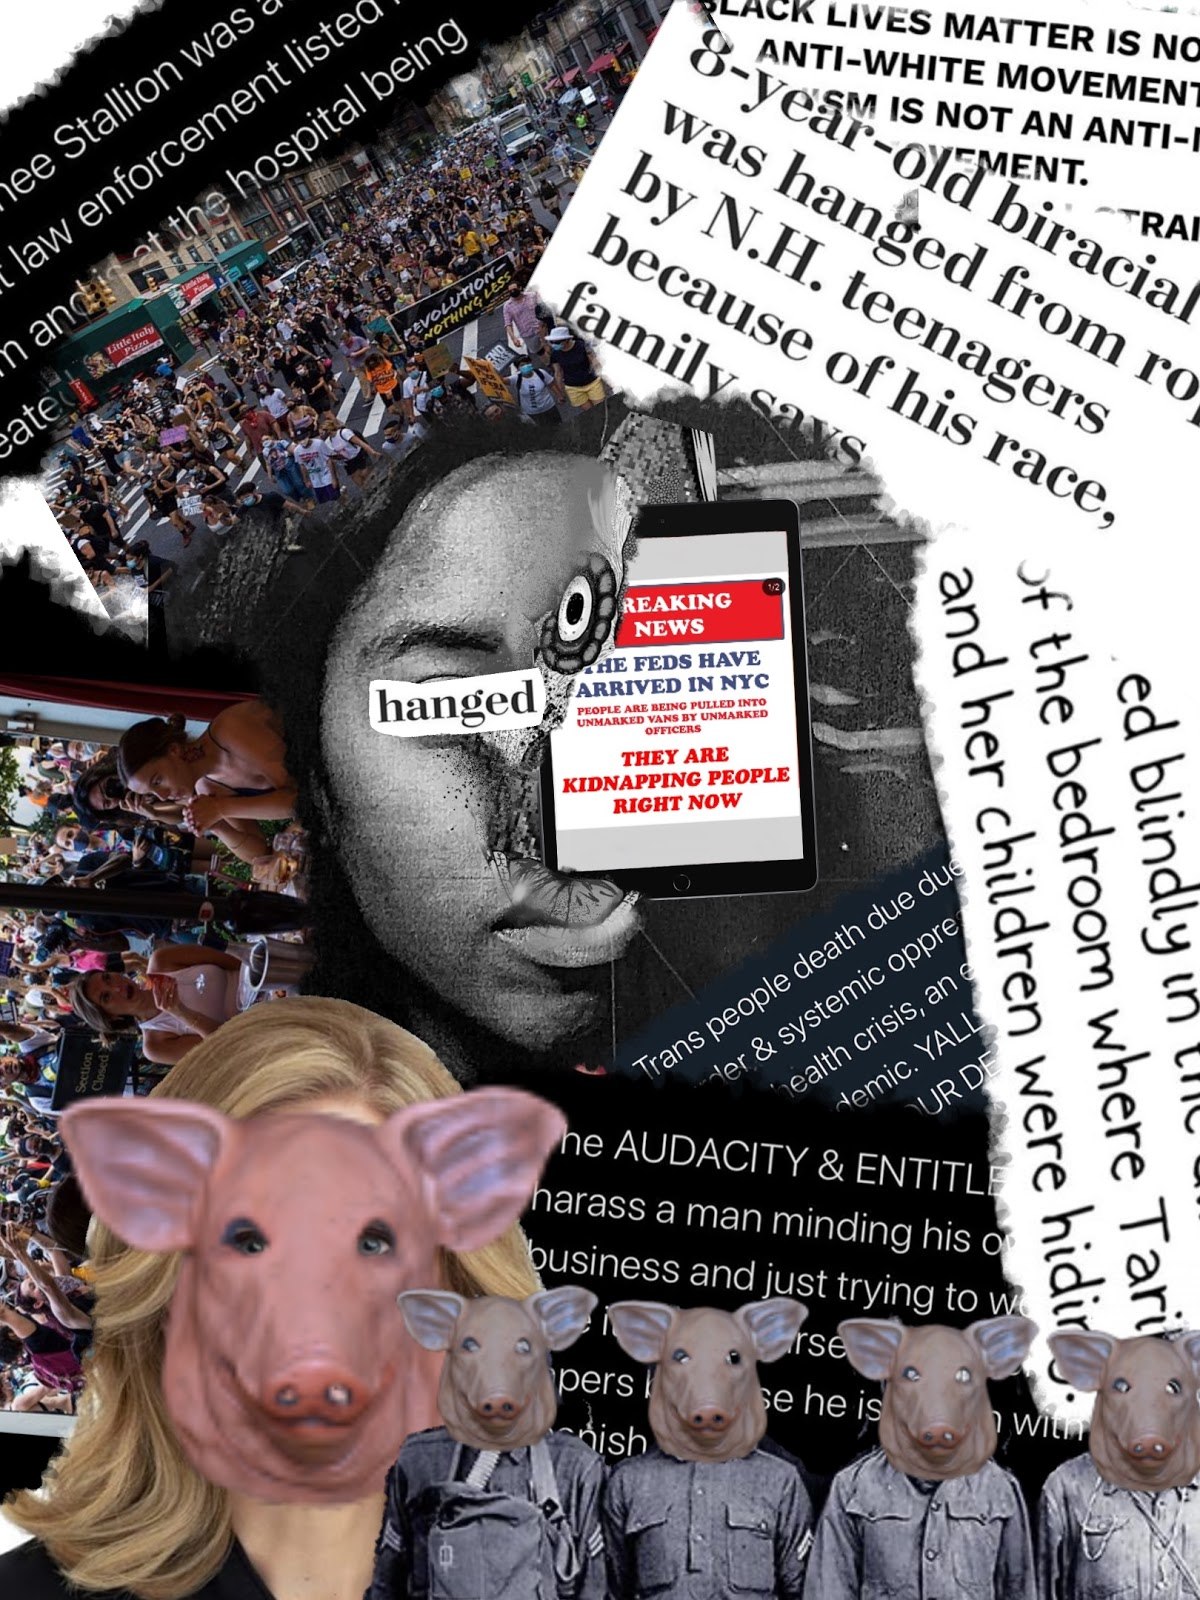 A collage of human bodies with pig faces and text from news articles relating to violence